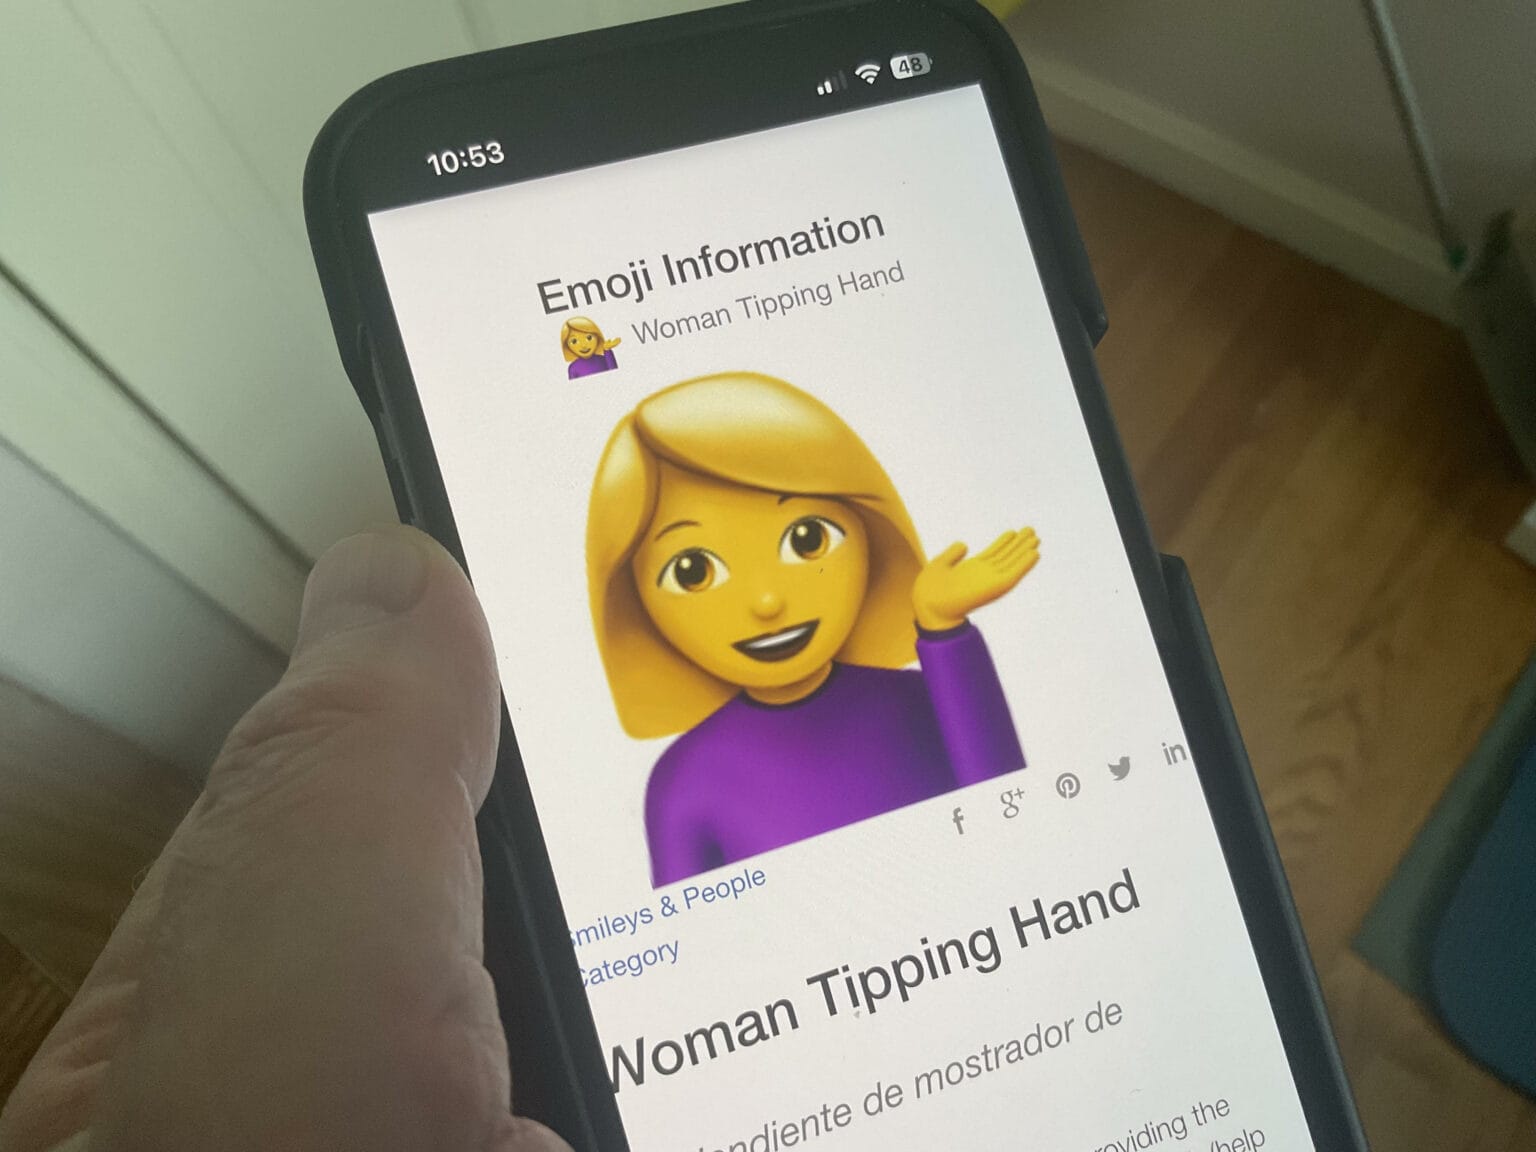 We have a winner: survey finds Woman Tipping Hand is most-confusing emoji.